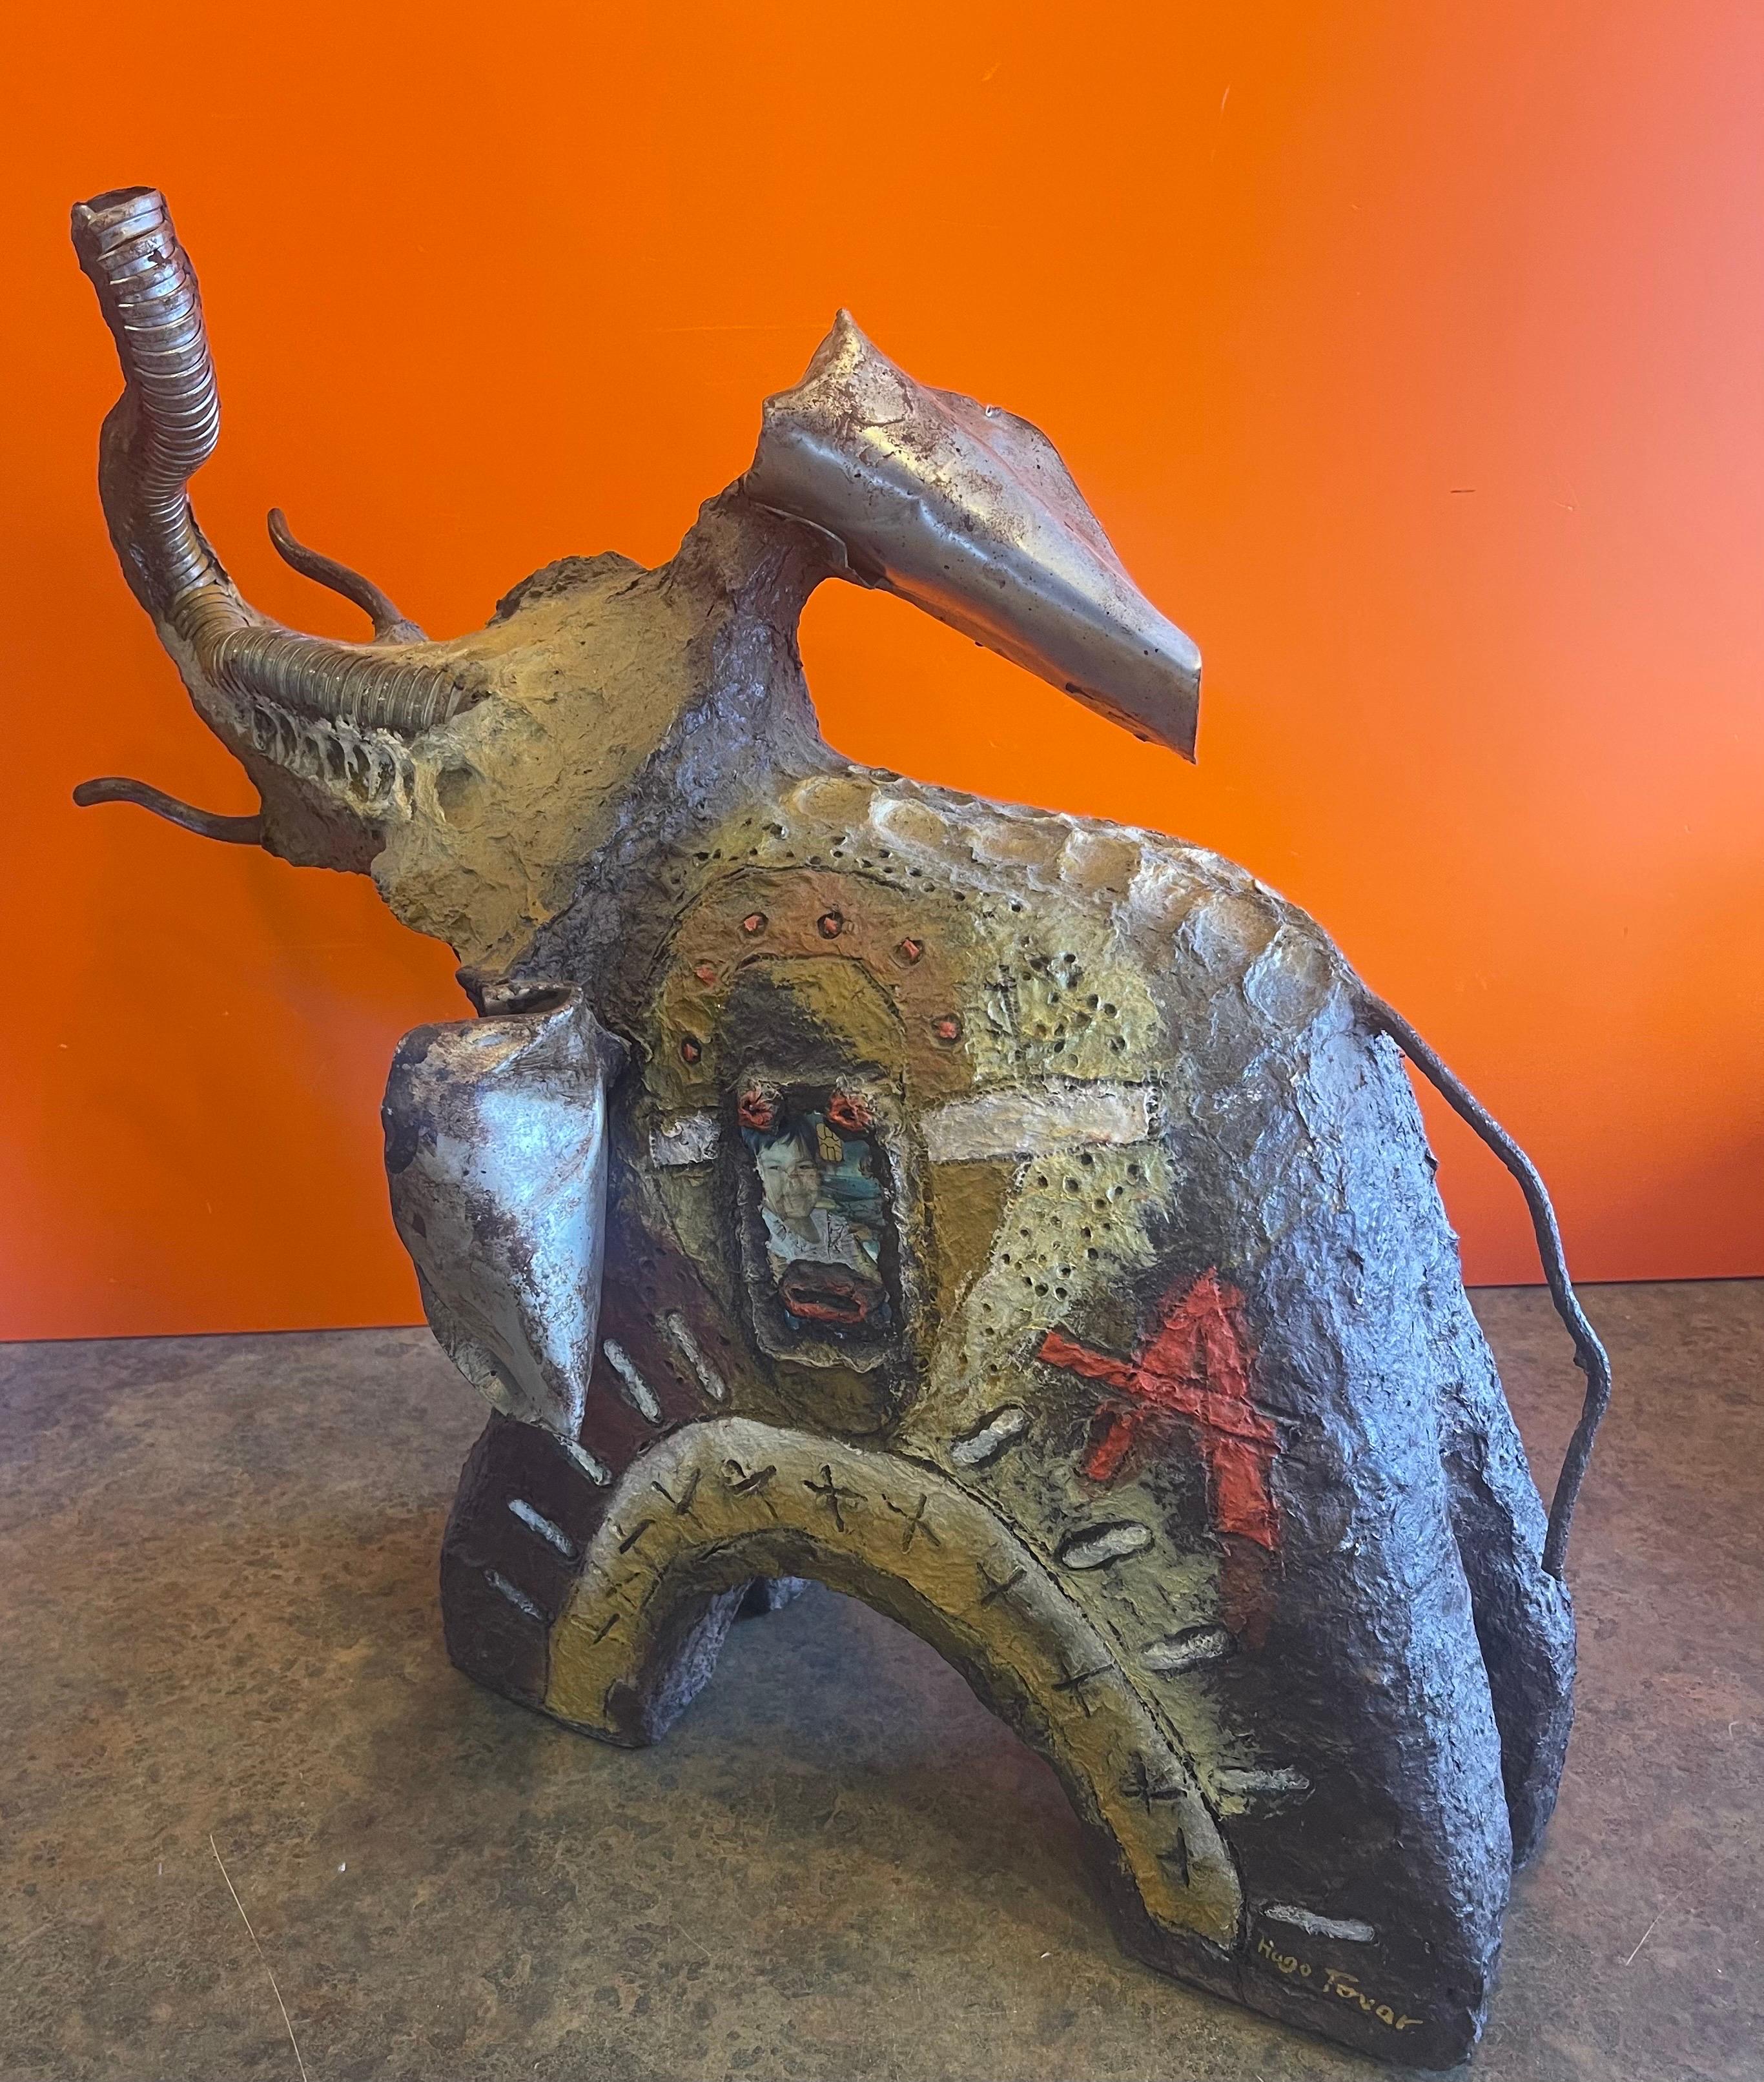 Hand sculpted modernist elephant assemblage sculpture by Hugo Tovar of Mexico, circa 2000. It portrays an elephant with trunk up; crafted and assembled from recycled materials including paper, various objects, metal, varnishes and acrylic paints.